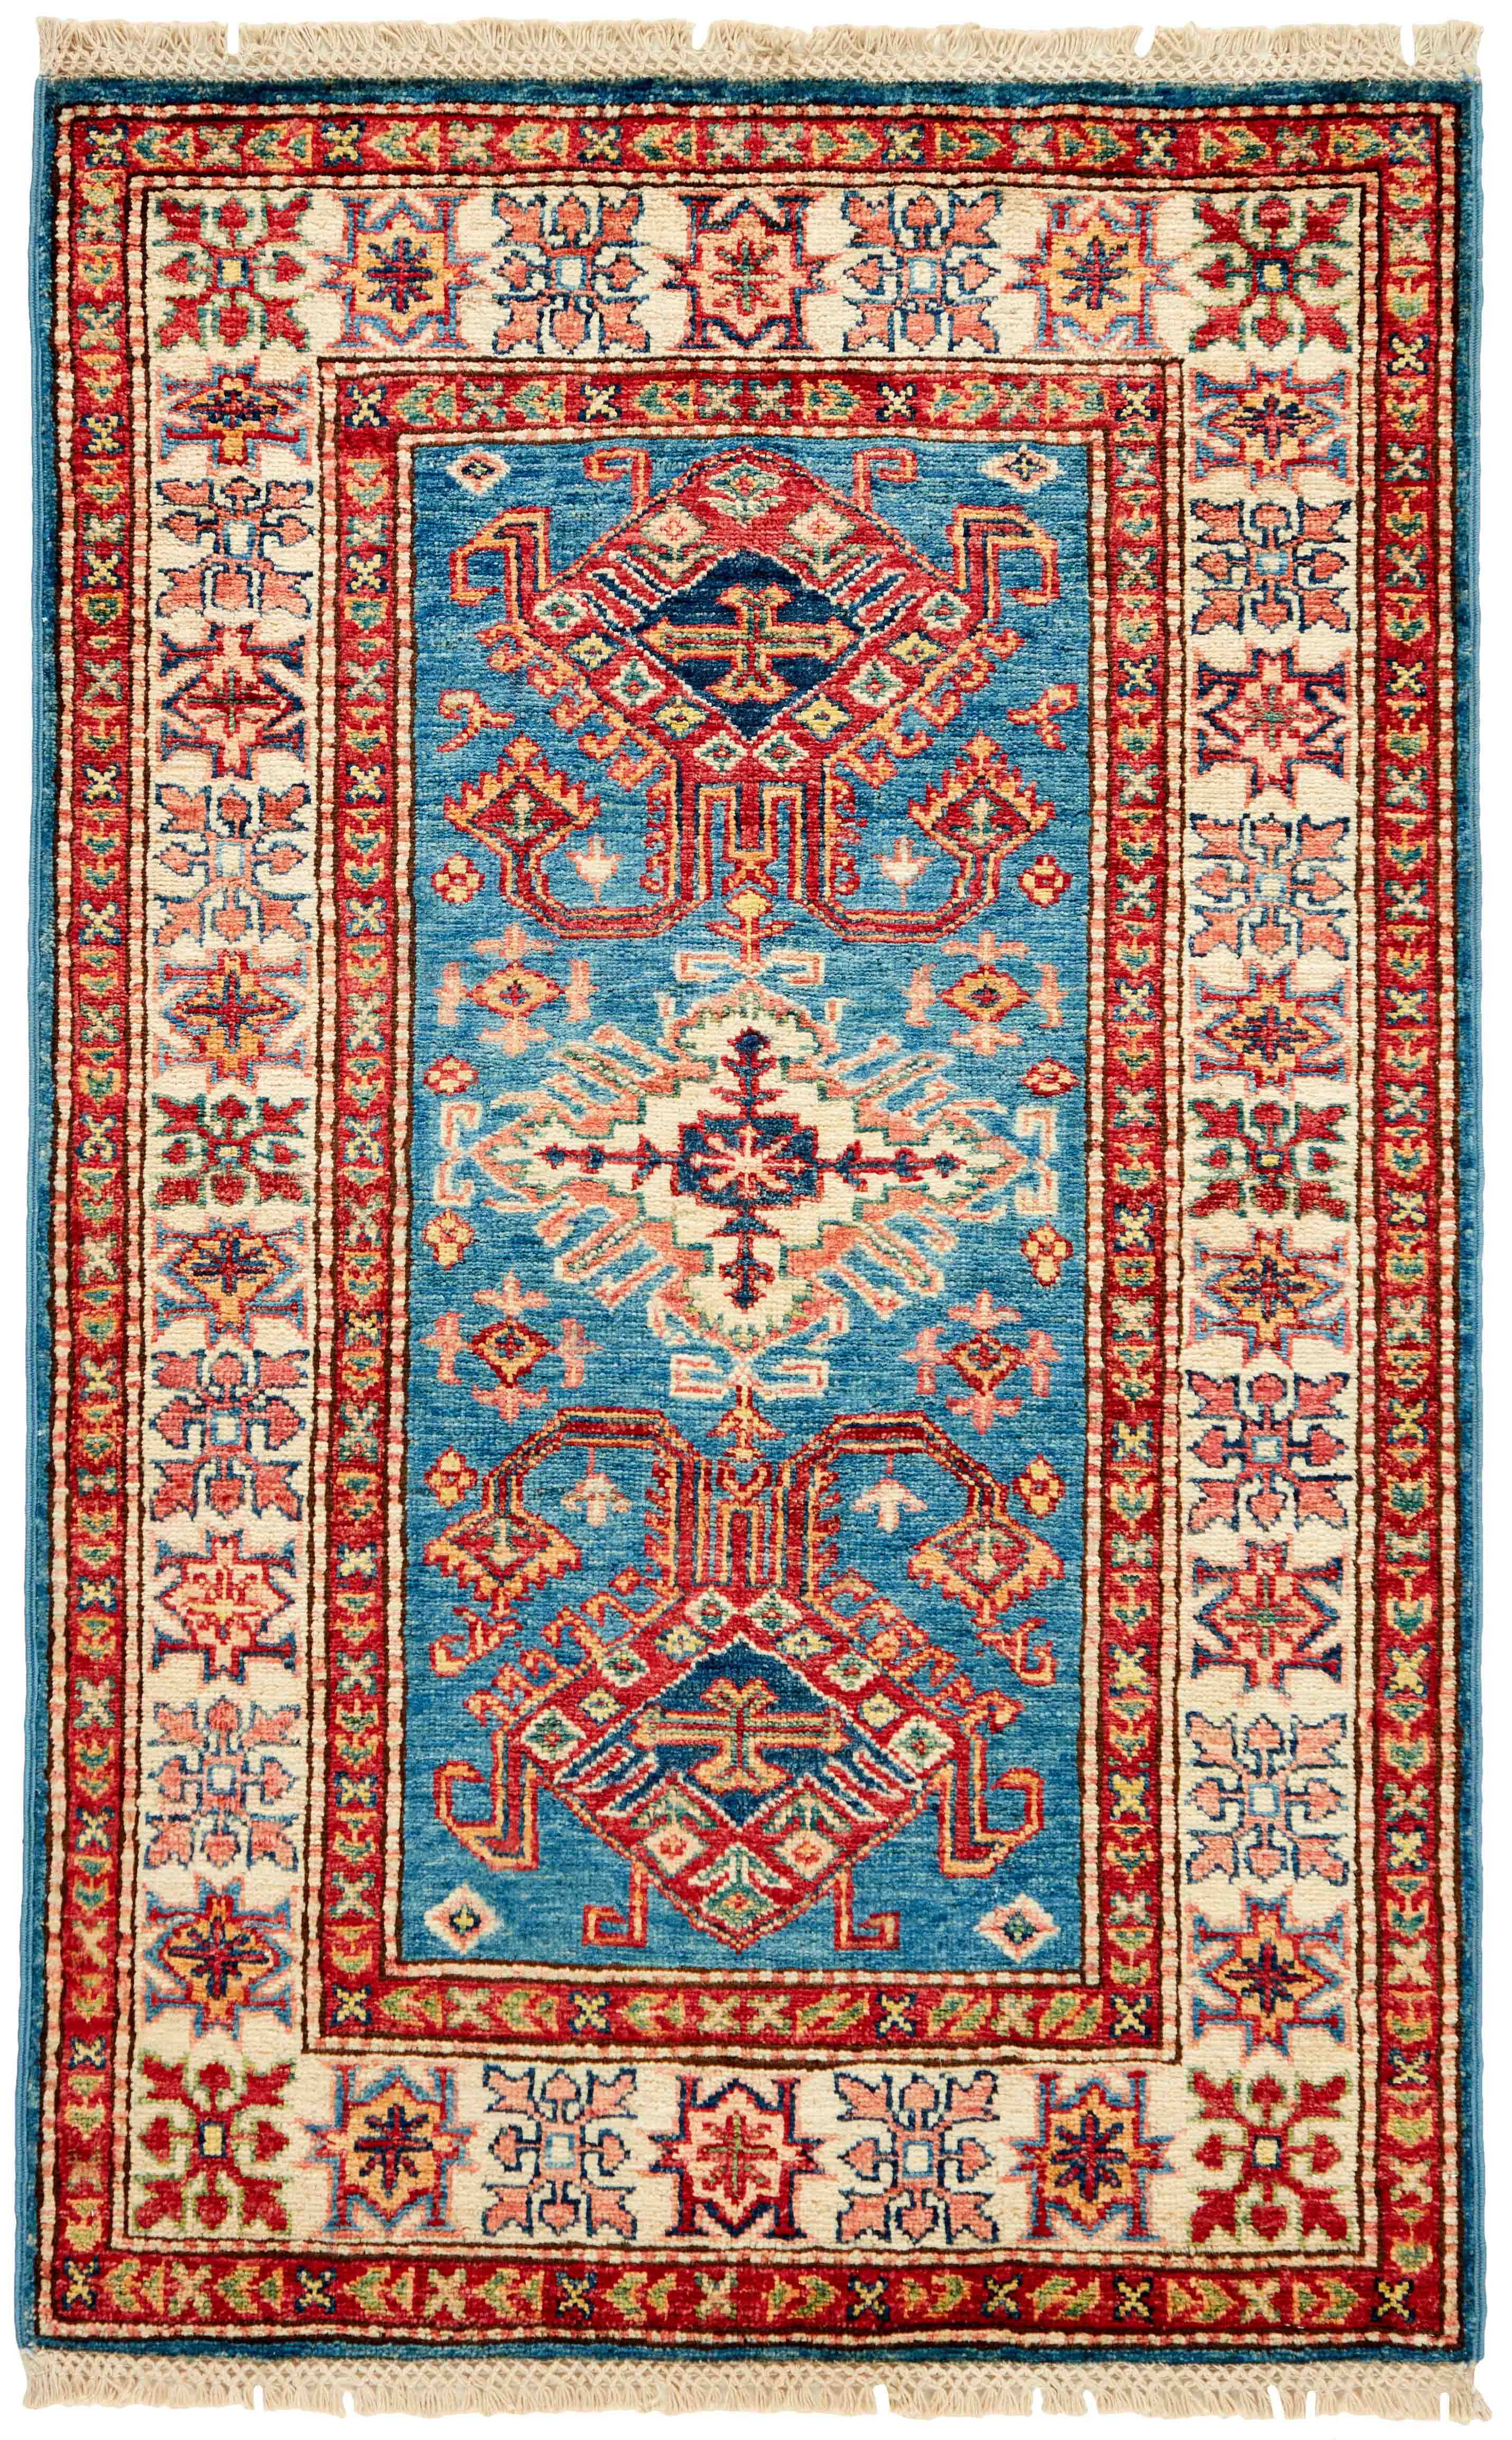 Authentic oriental rug with red, beige, yellow and blue traditional geometric design